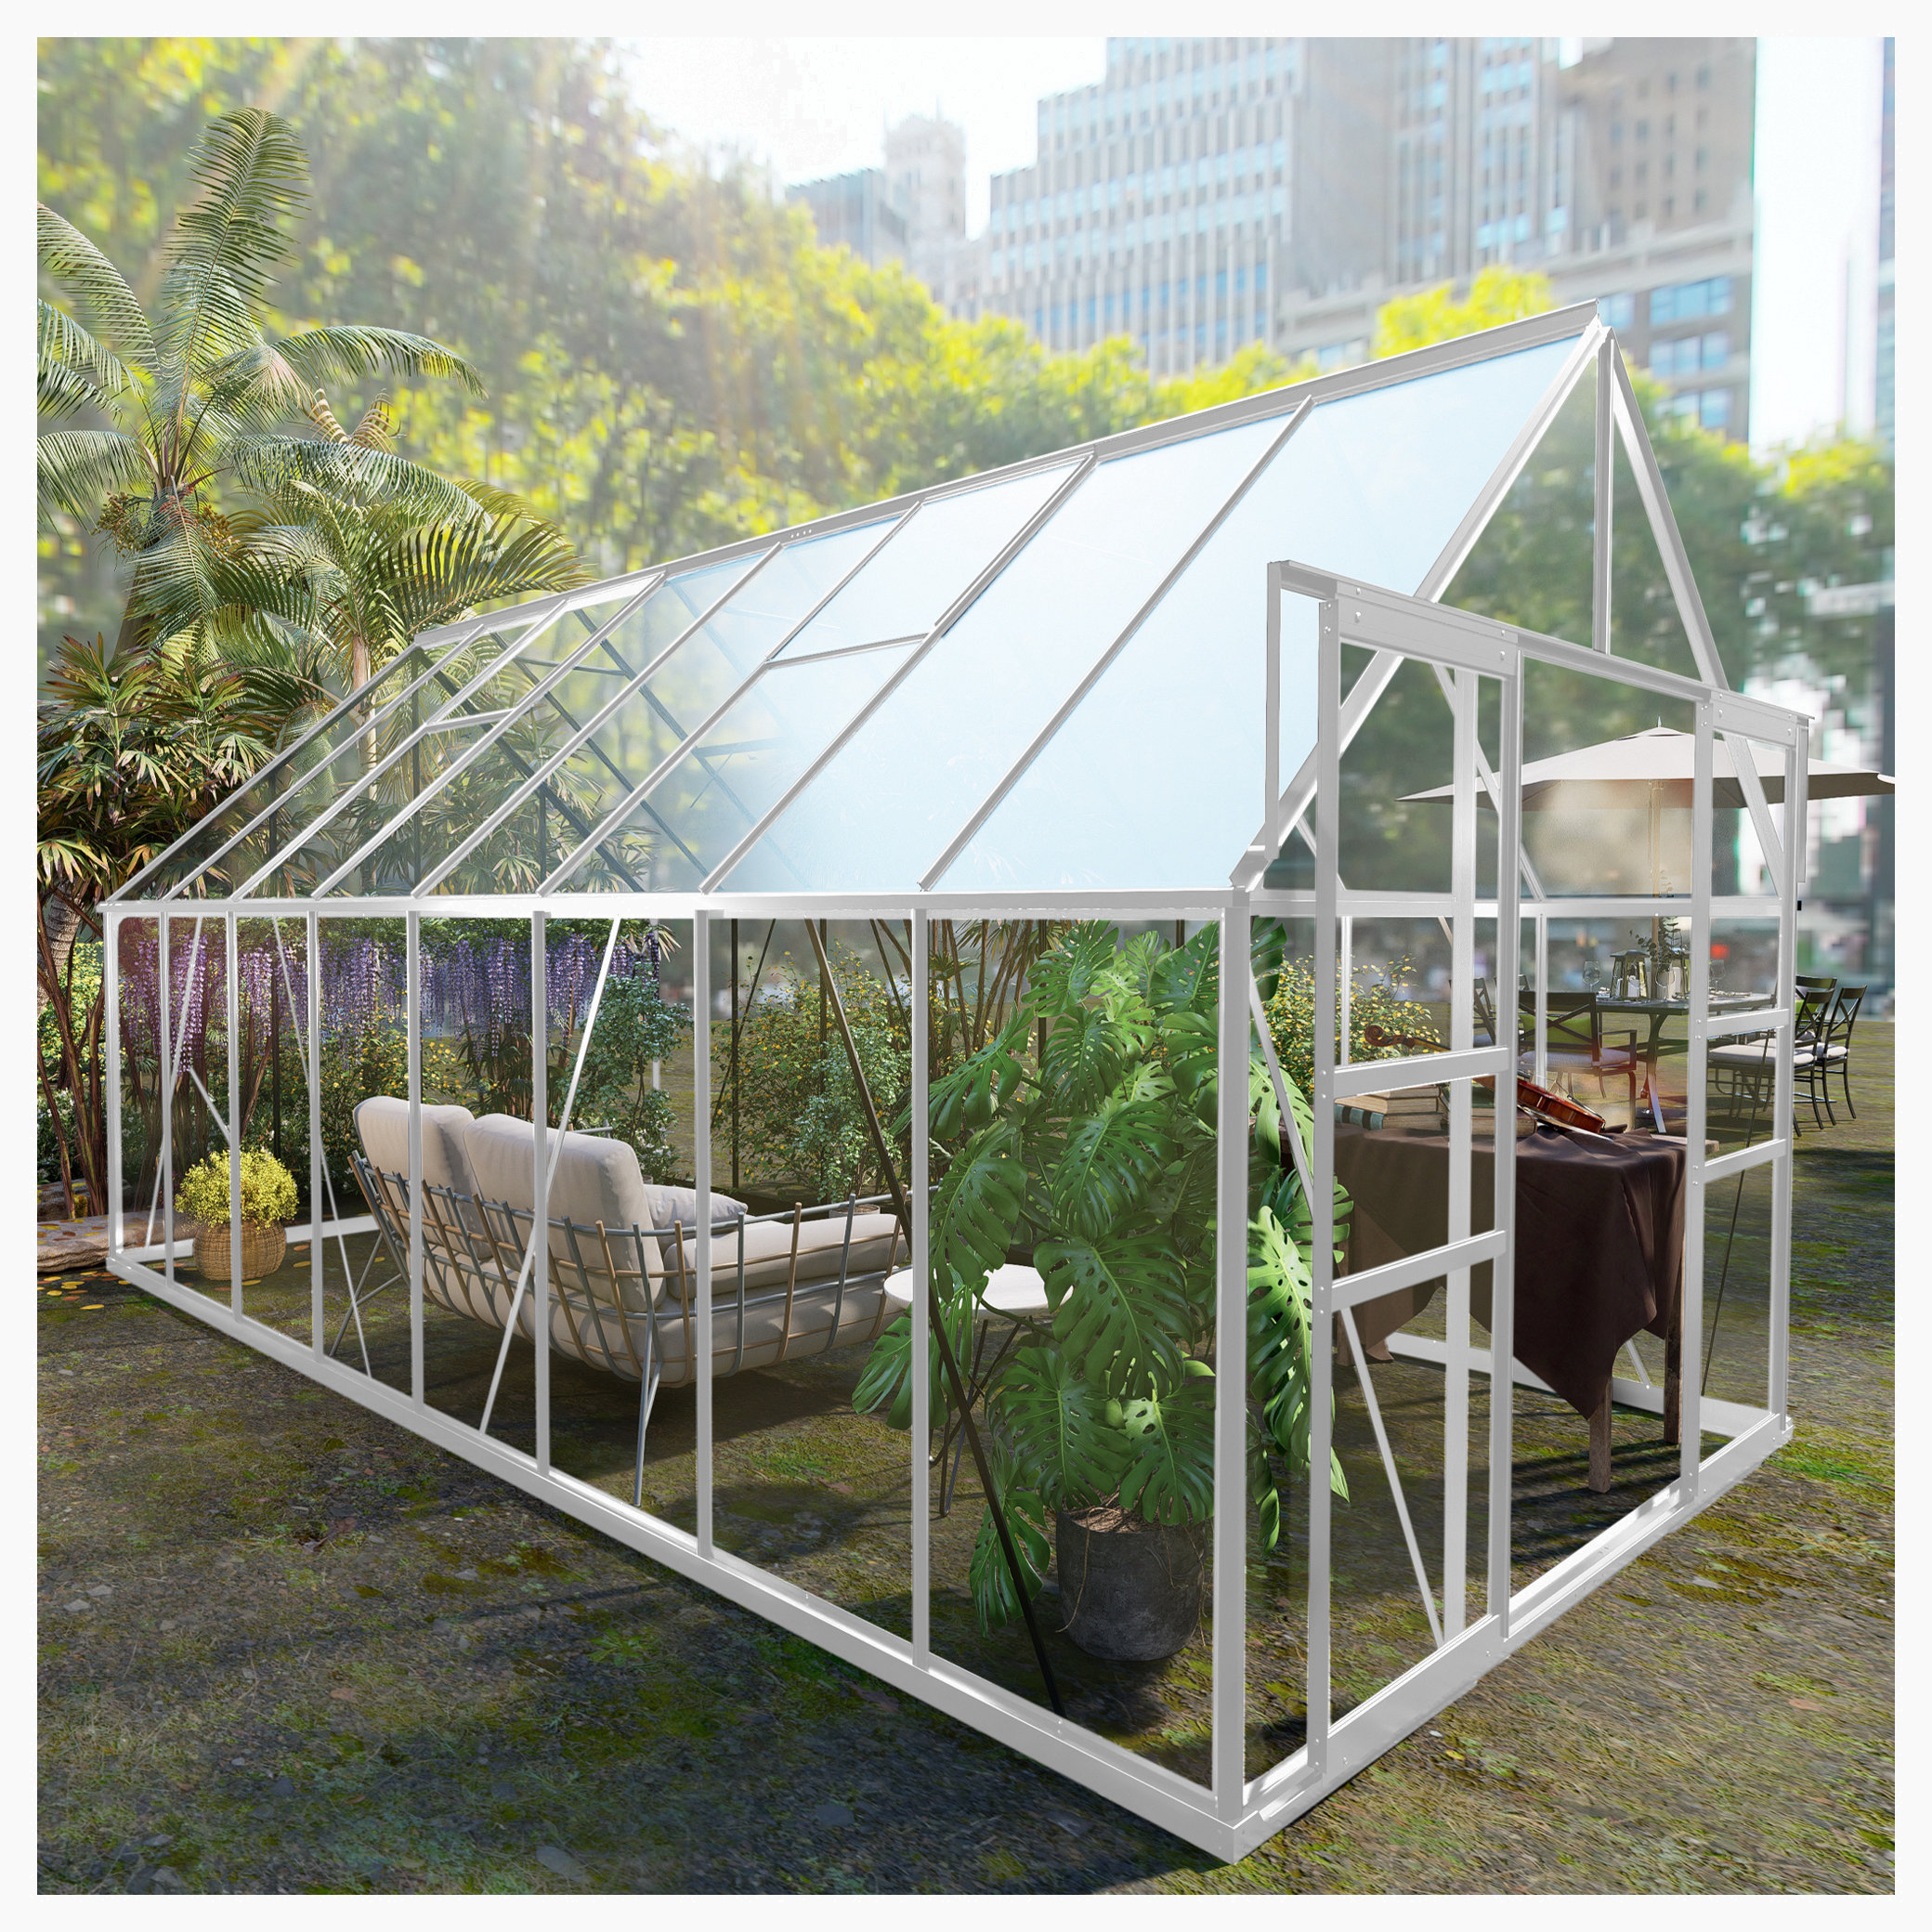 Greenhouse for Outdoors, 6' x 10' Aluminum Greenhouse with Window, Sliding  Door, Polycarbonate Greenhouses Garden Supplies for Plants Flowers Herbs